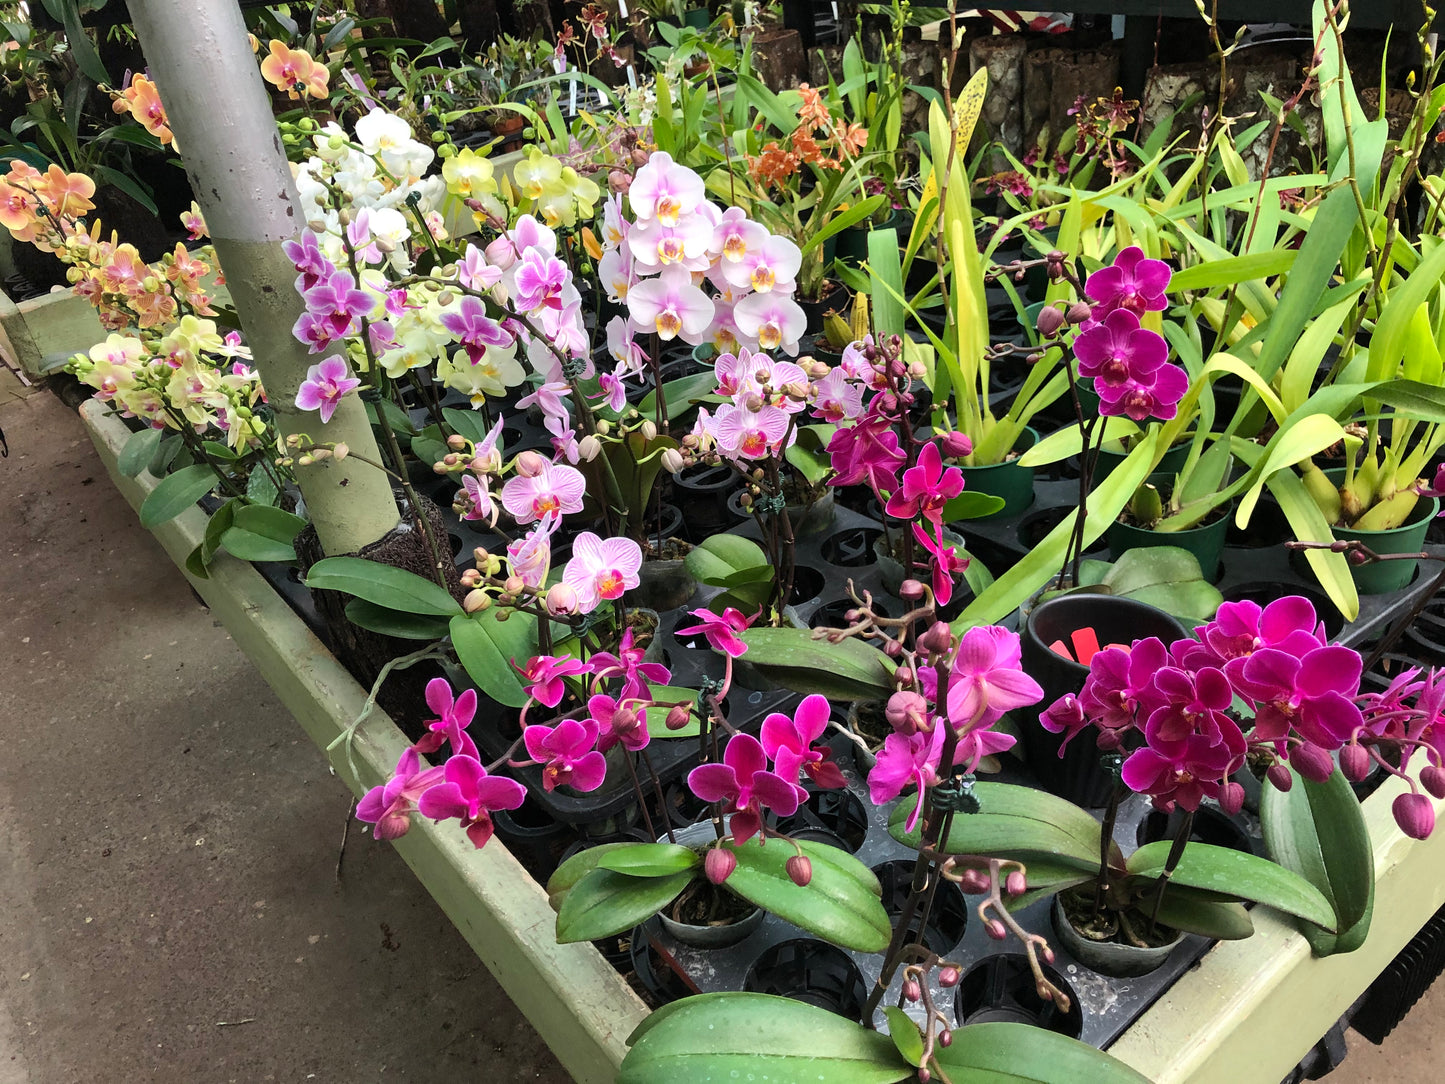 6 Phalaenopsis (mix colors) in a 3” pot